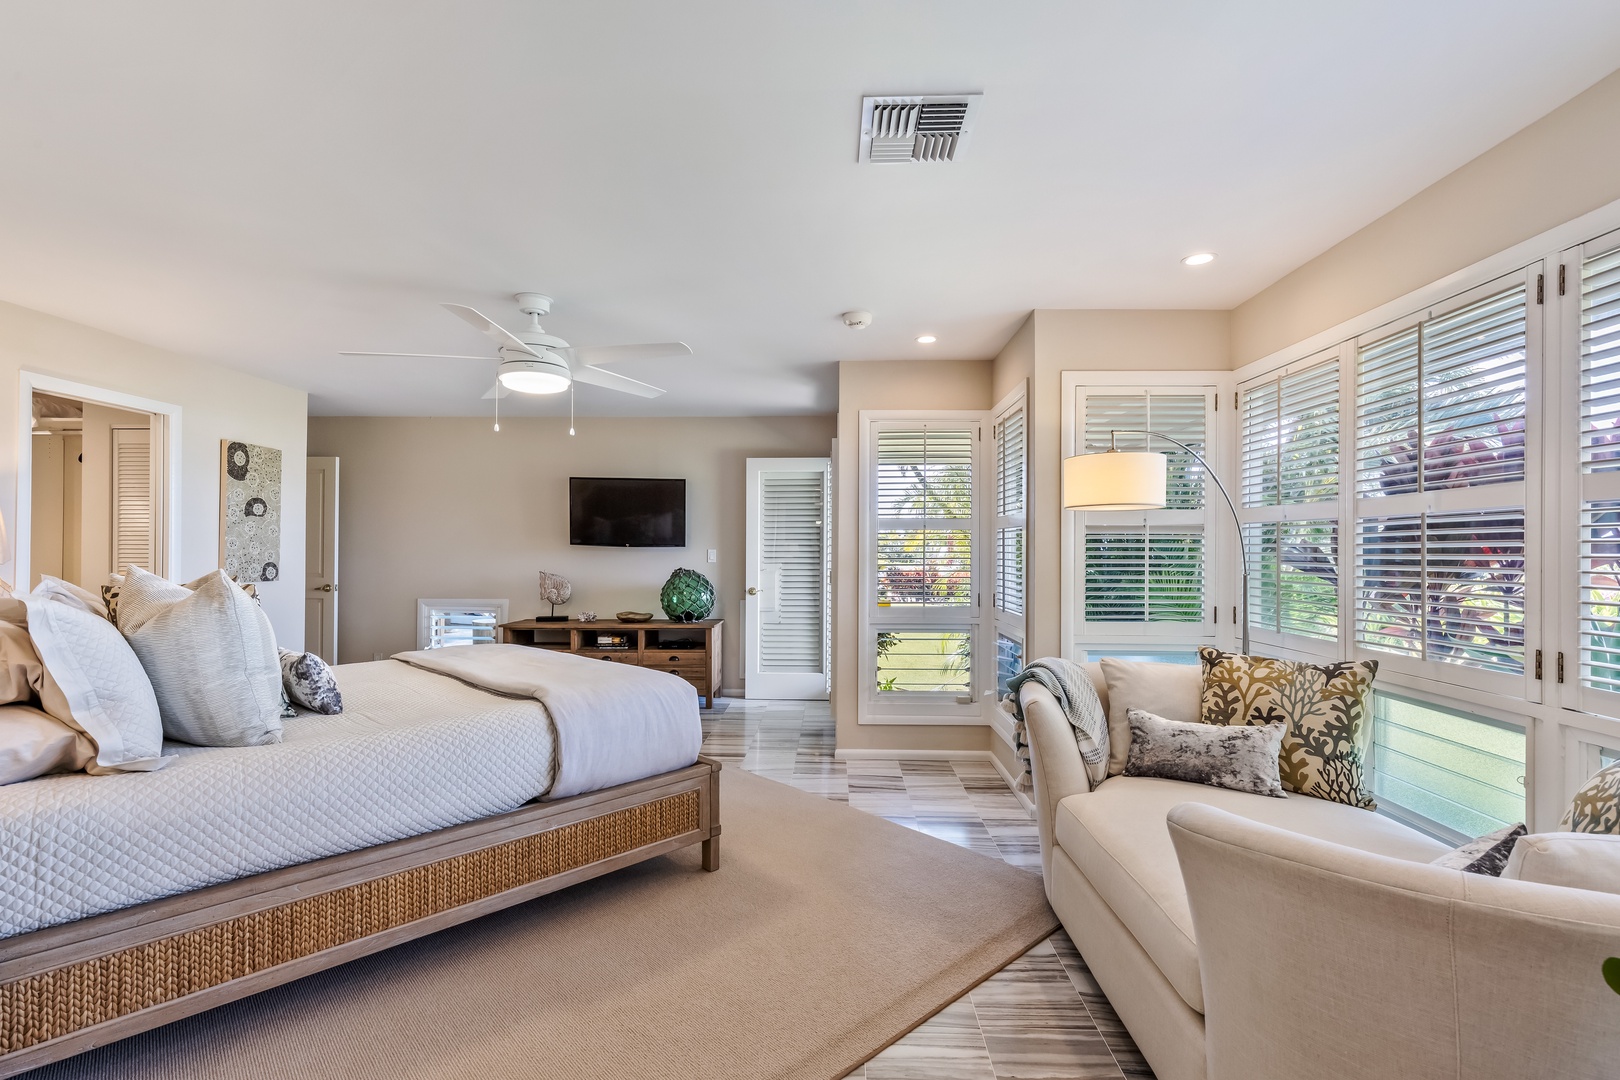 Honolulu Vacation Rentals, Hale Ola - Relax is guaranteed in this stunning bedroom